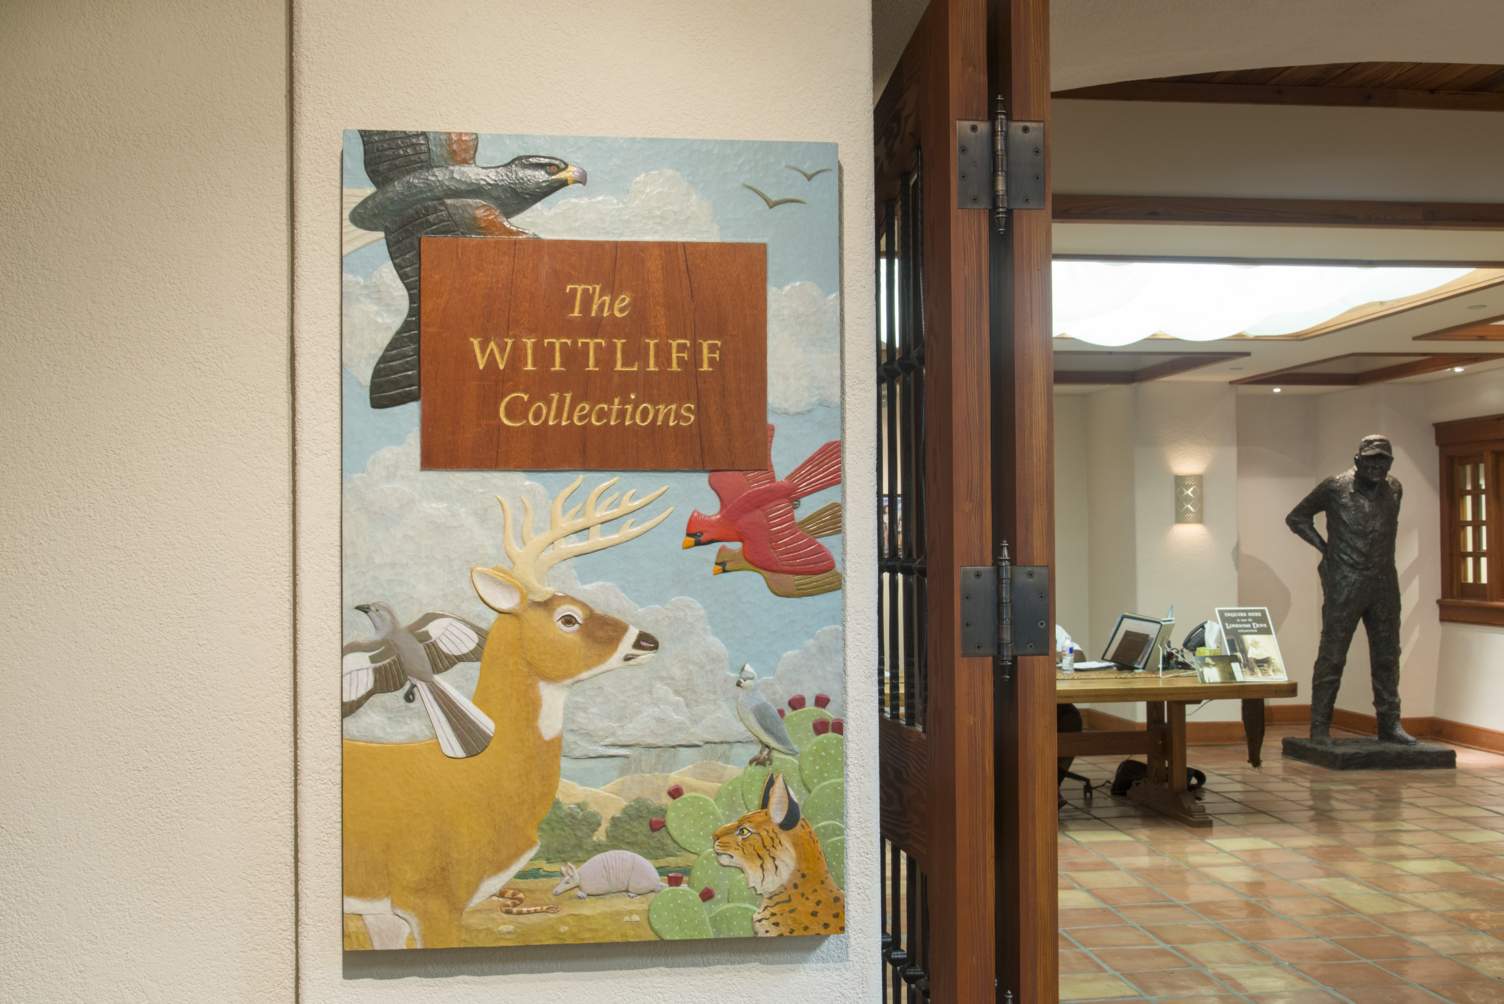 wittliff collections entrance sign